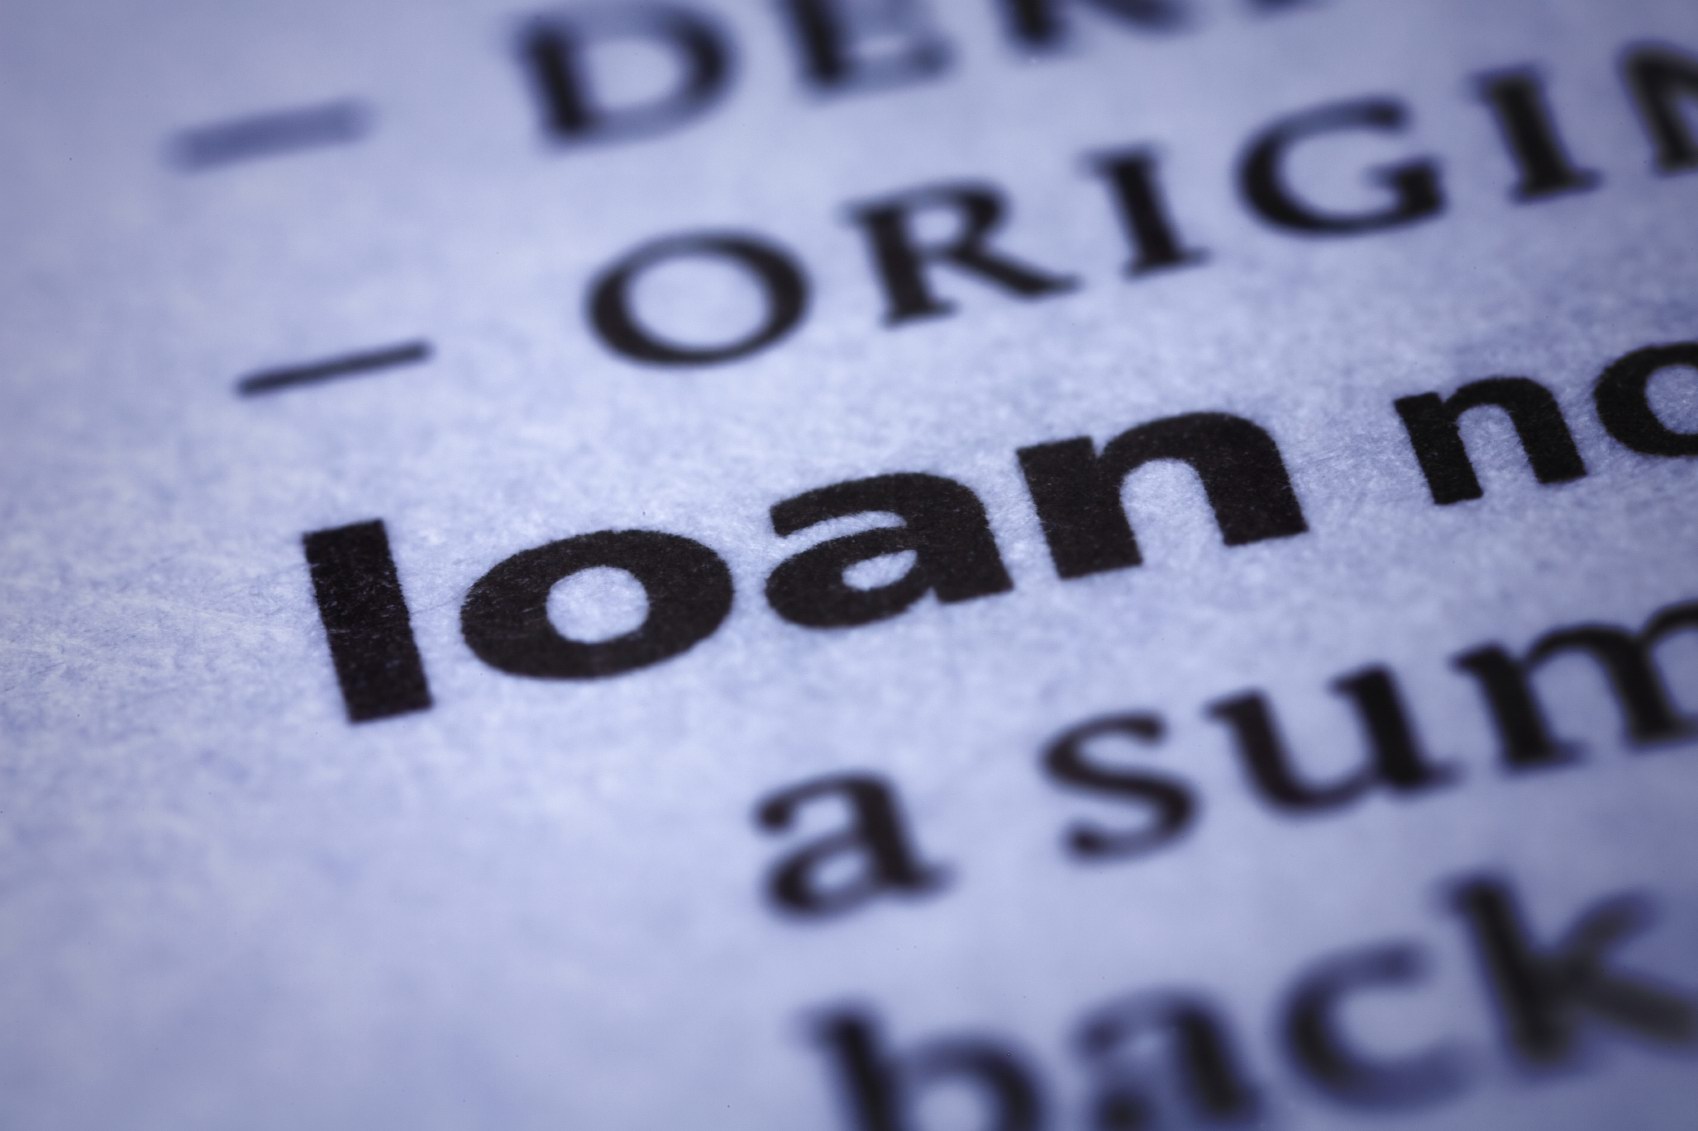 what is an unsecured loan